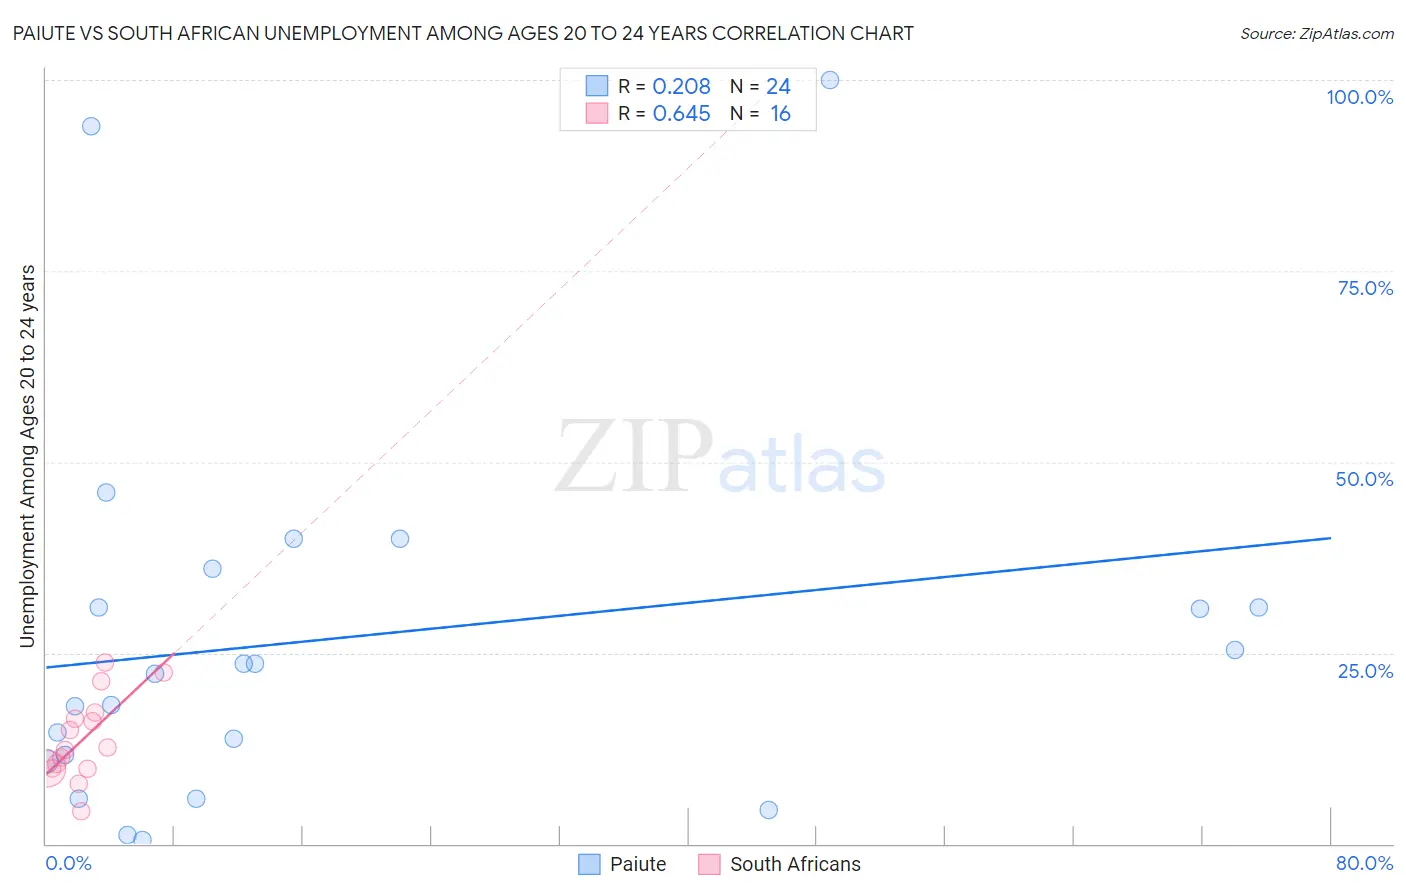 Paiute vs South African Unemployment Among Ages 20 to 24 years